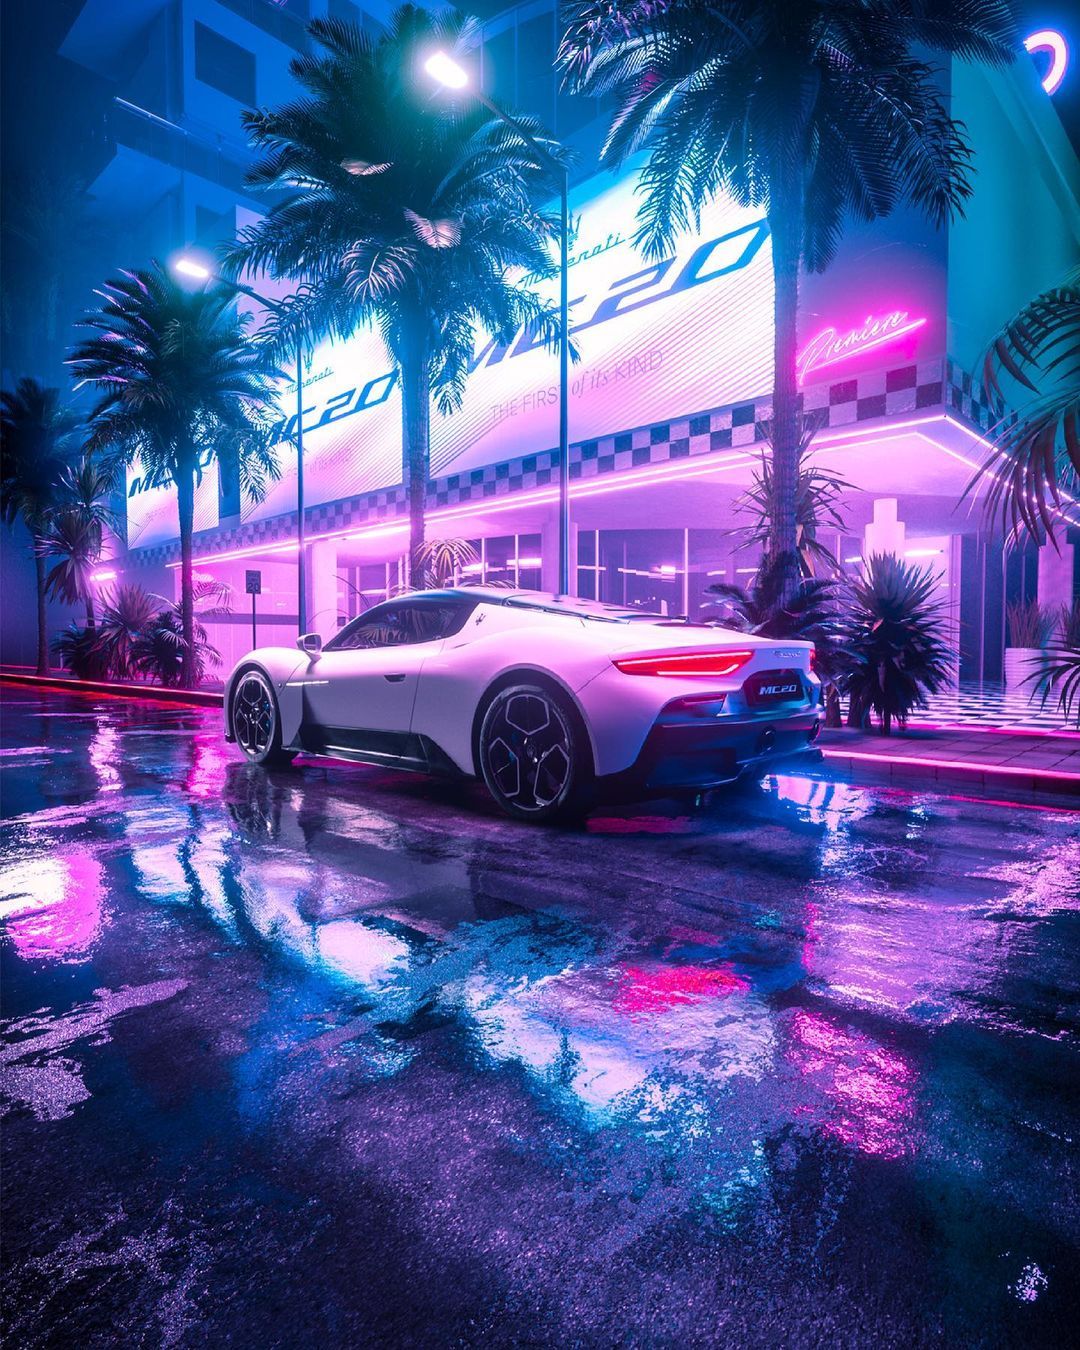 Maserati on Instagram: “Glowing in the neon lights, the arrival of the MC20 marks the beginning of the show. We ar… in 2021